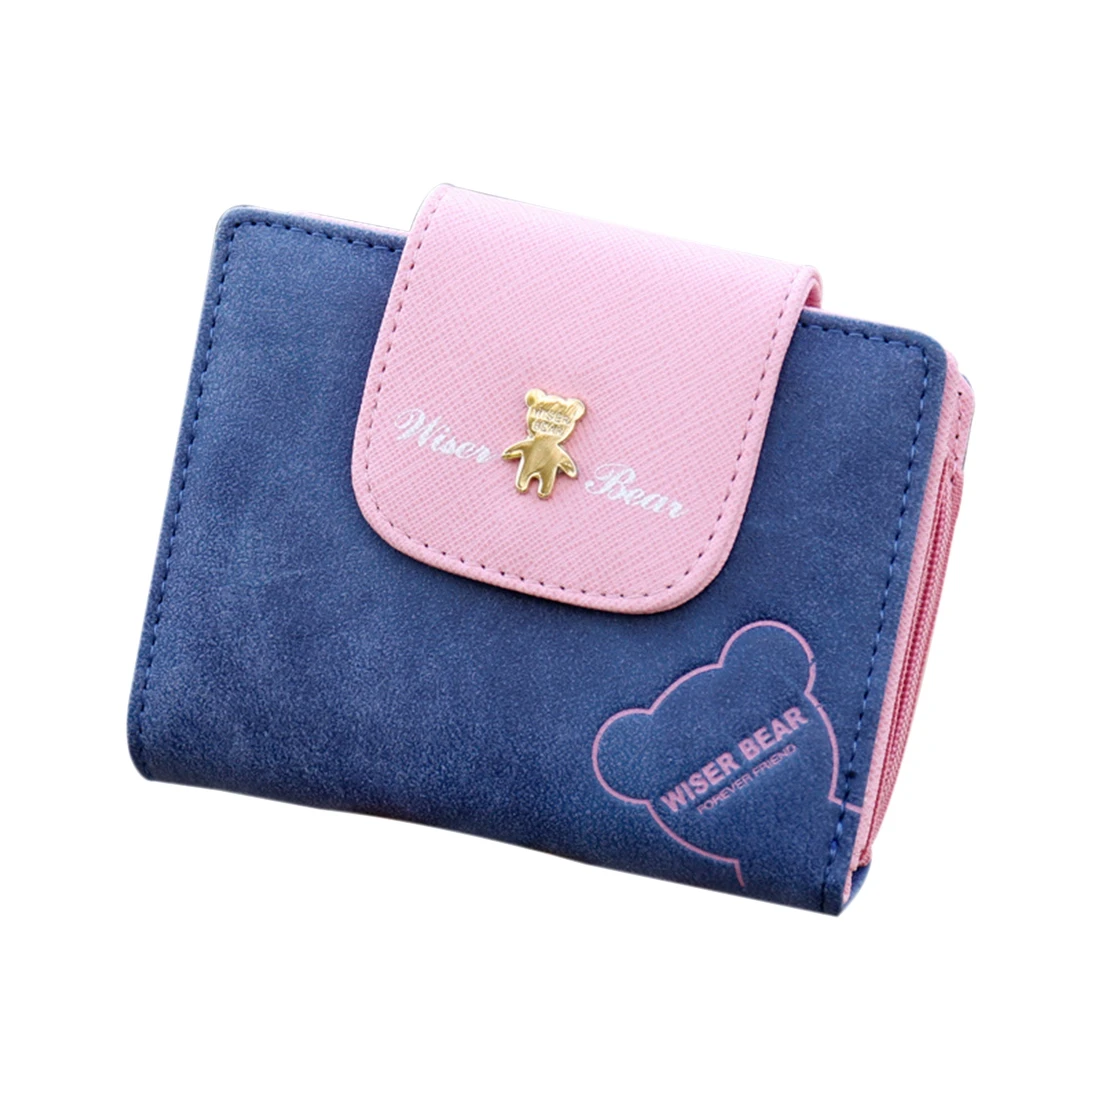 Fashion Lovely Bear Wallet Female Leather Small Change Clasp Purse Money Card Coin Holder Girls ...